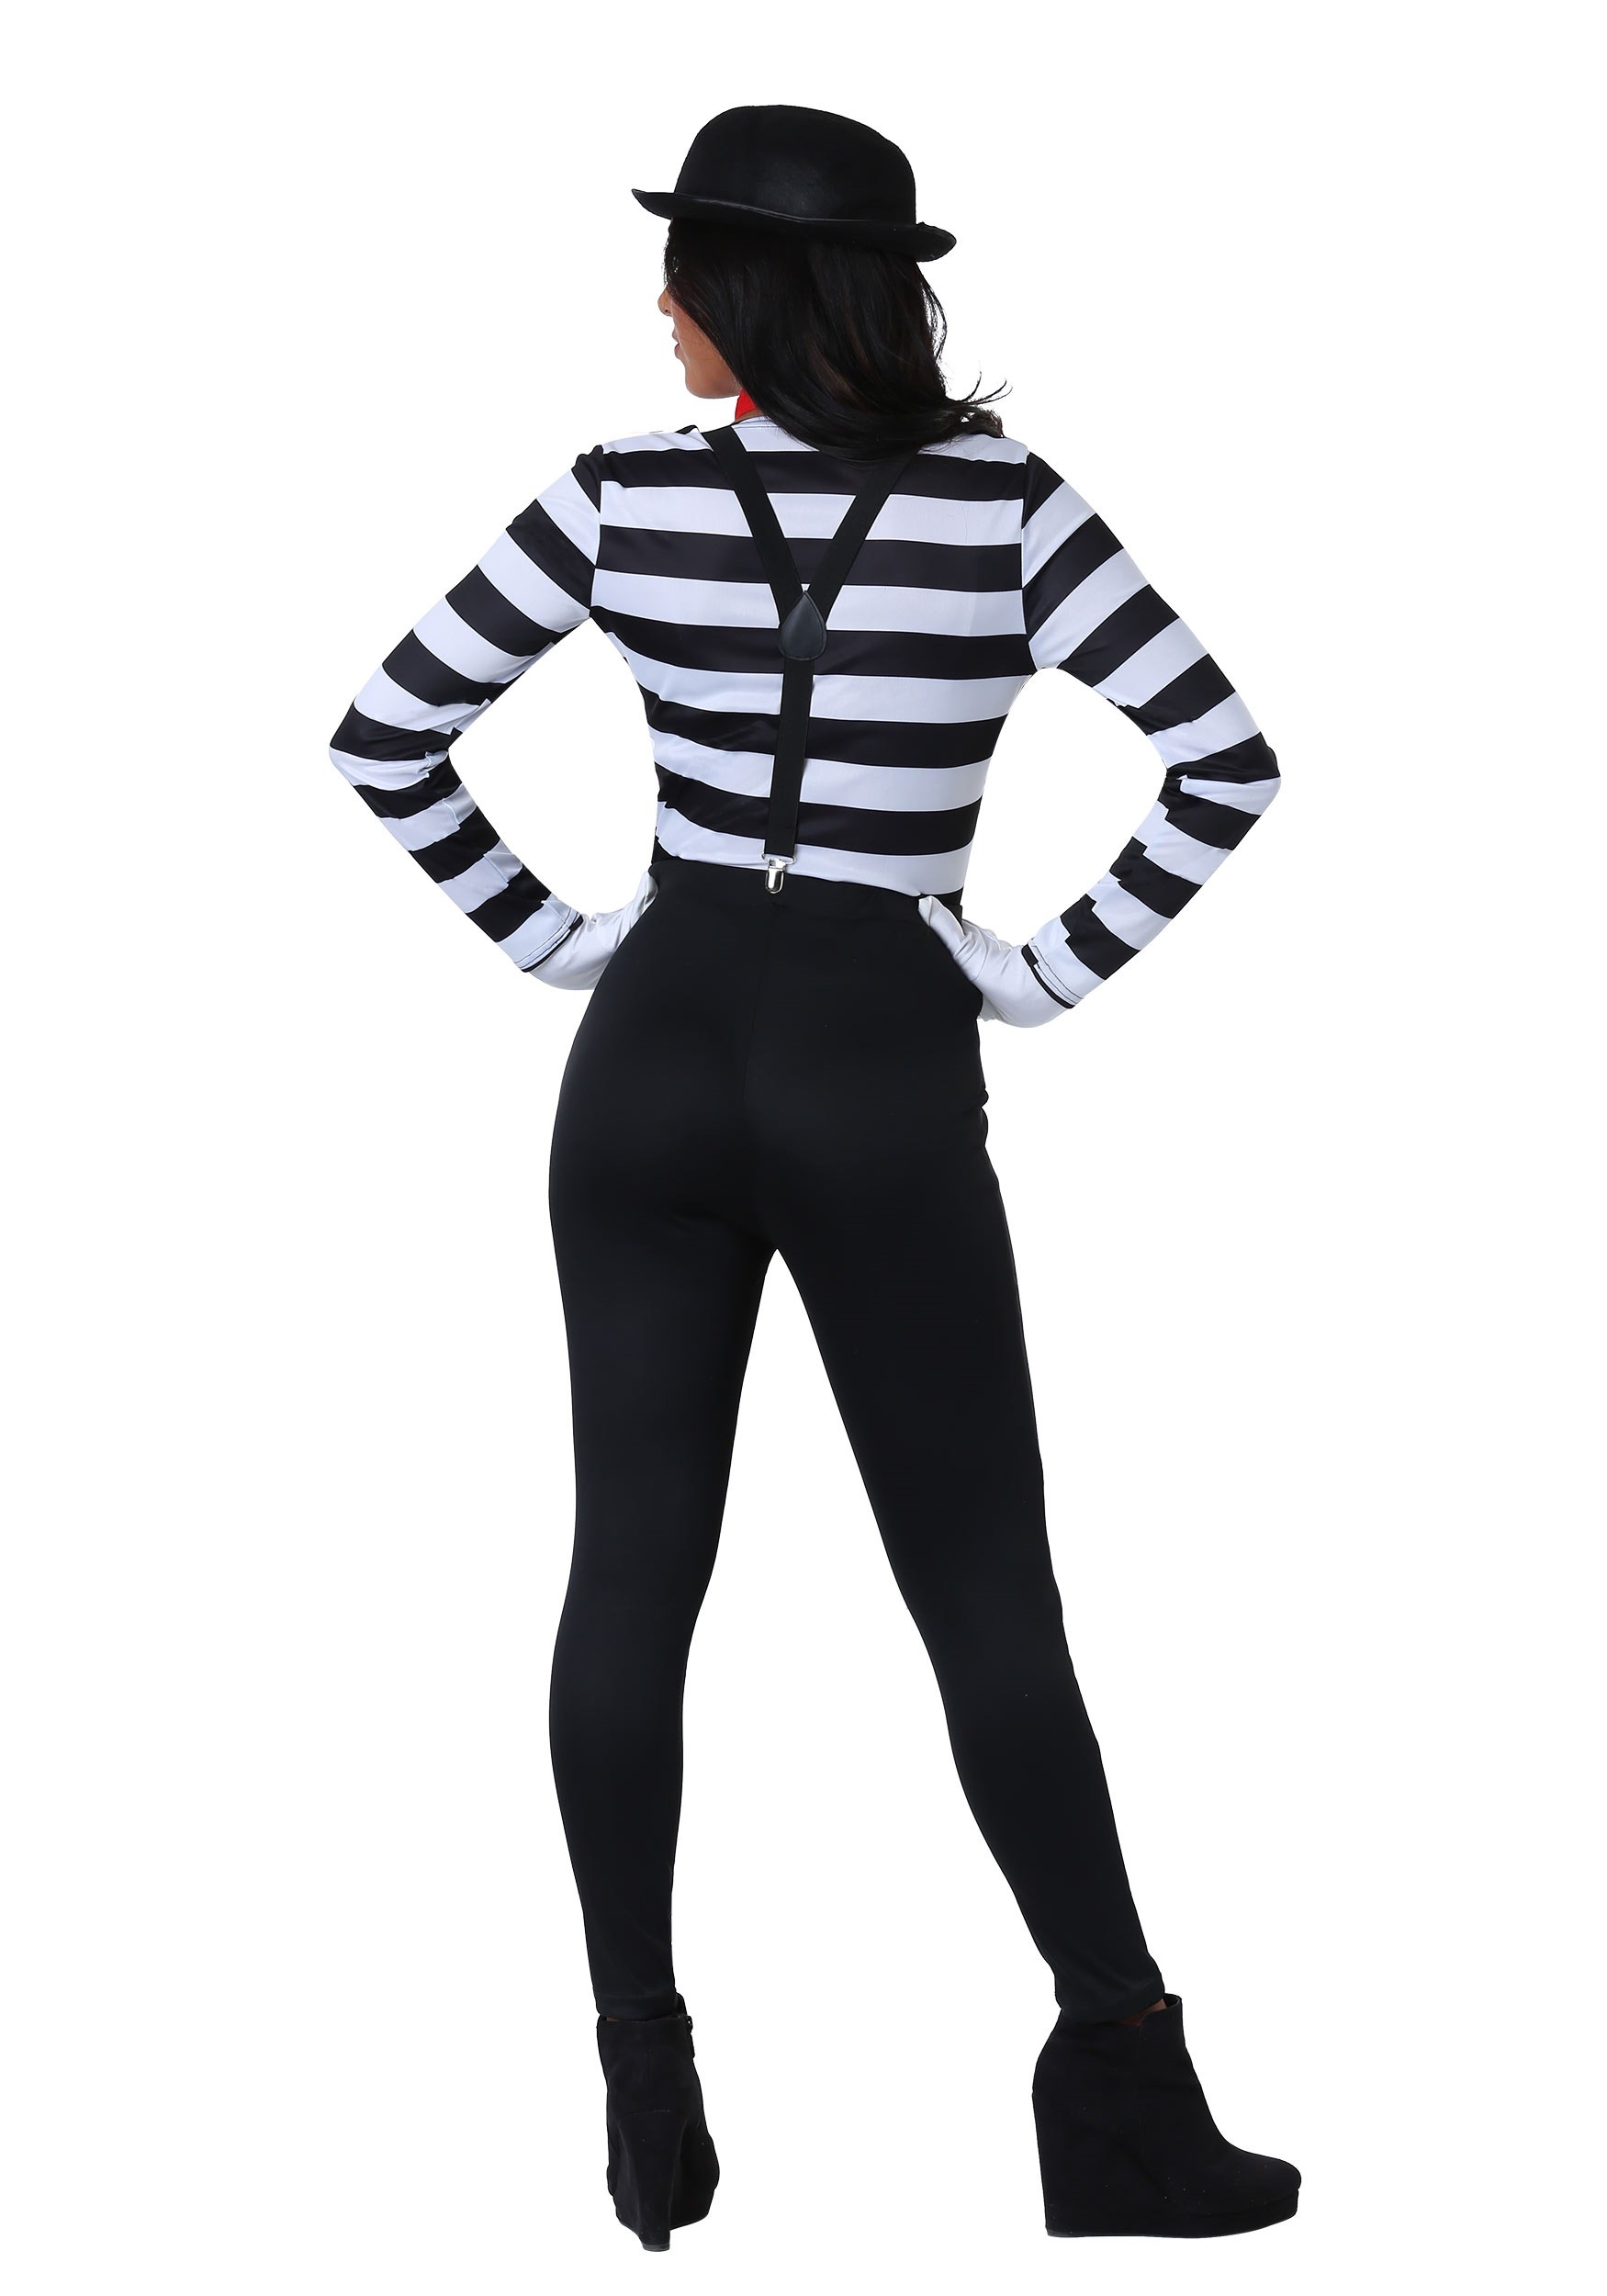 Mime cosplay. Female MIME.